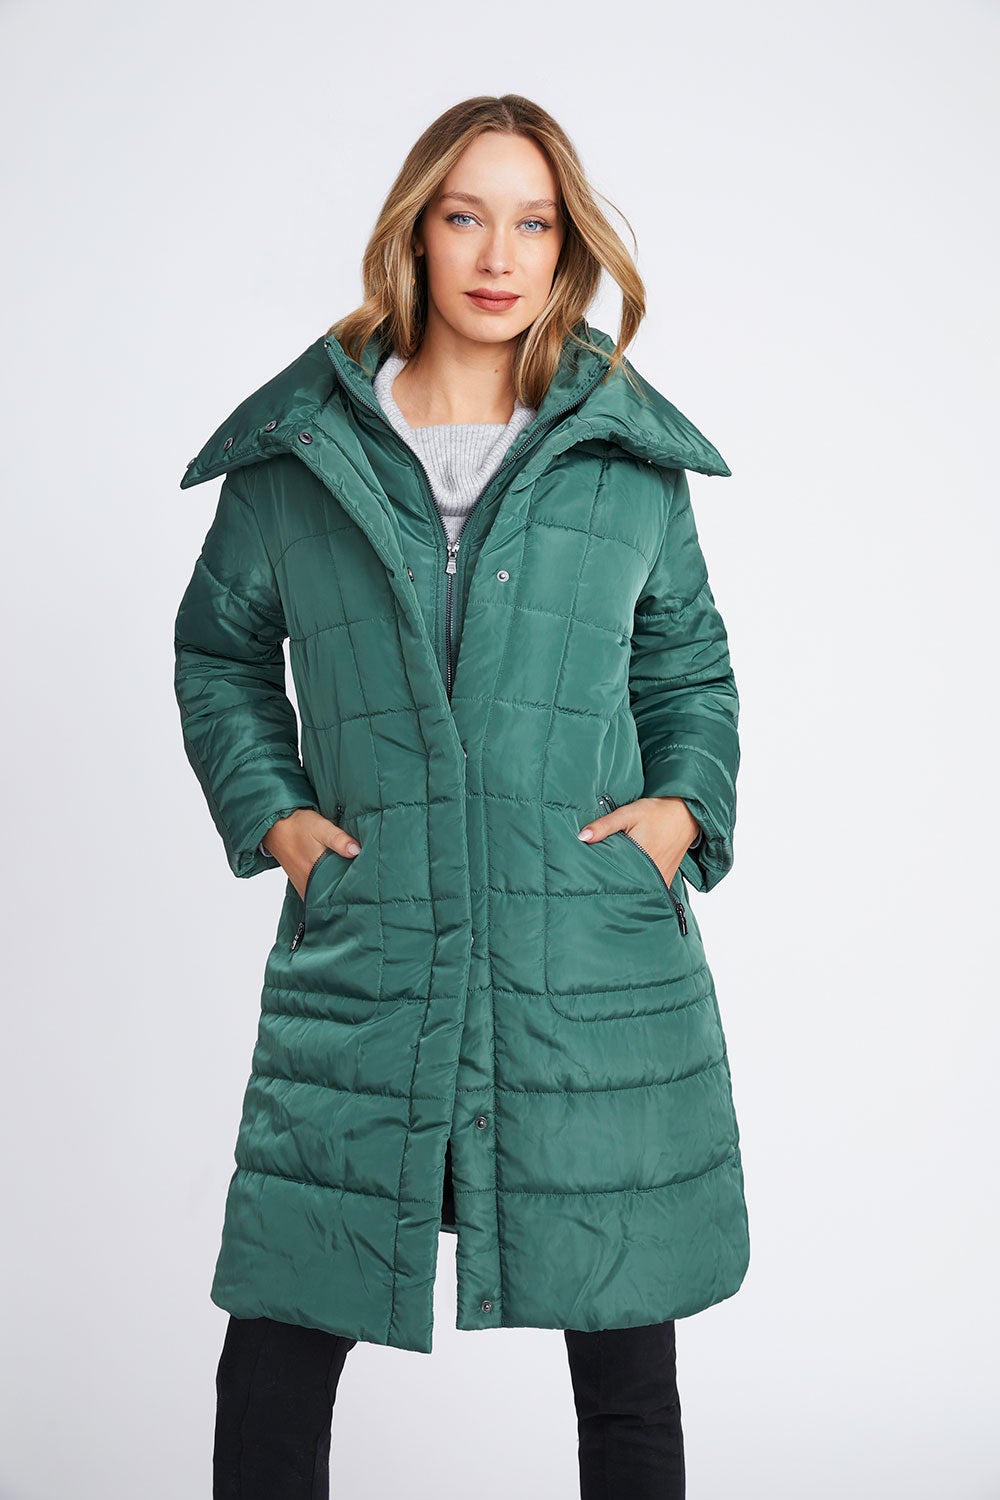 Quilted Puffer | Noni B